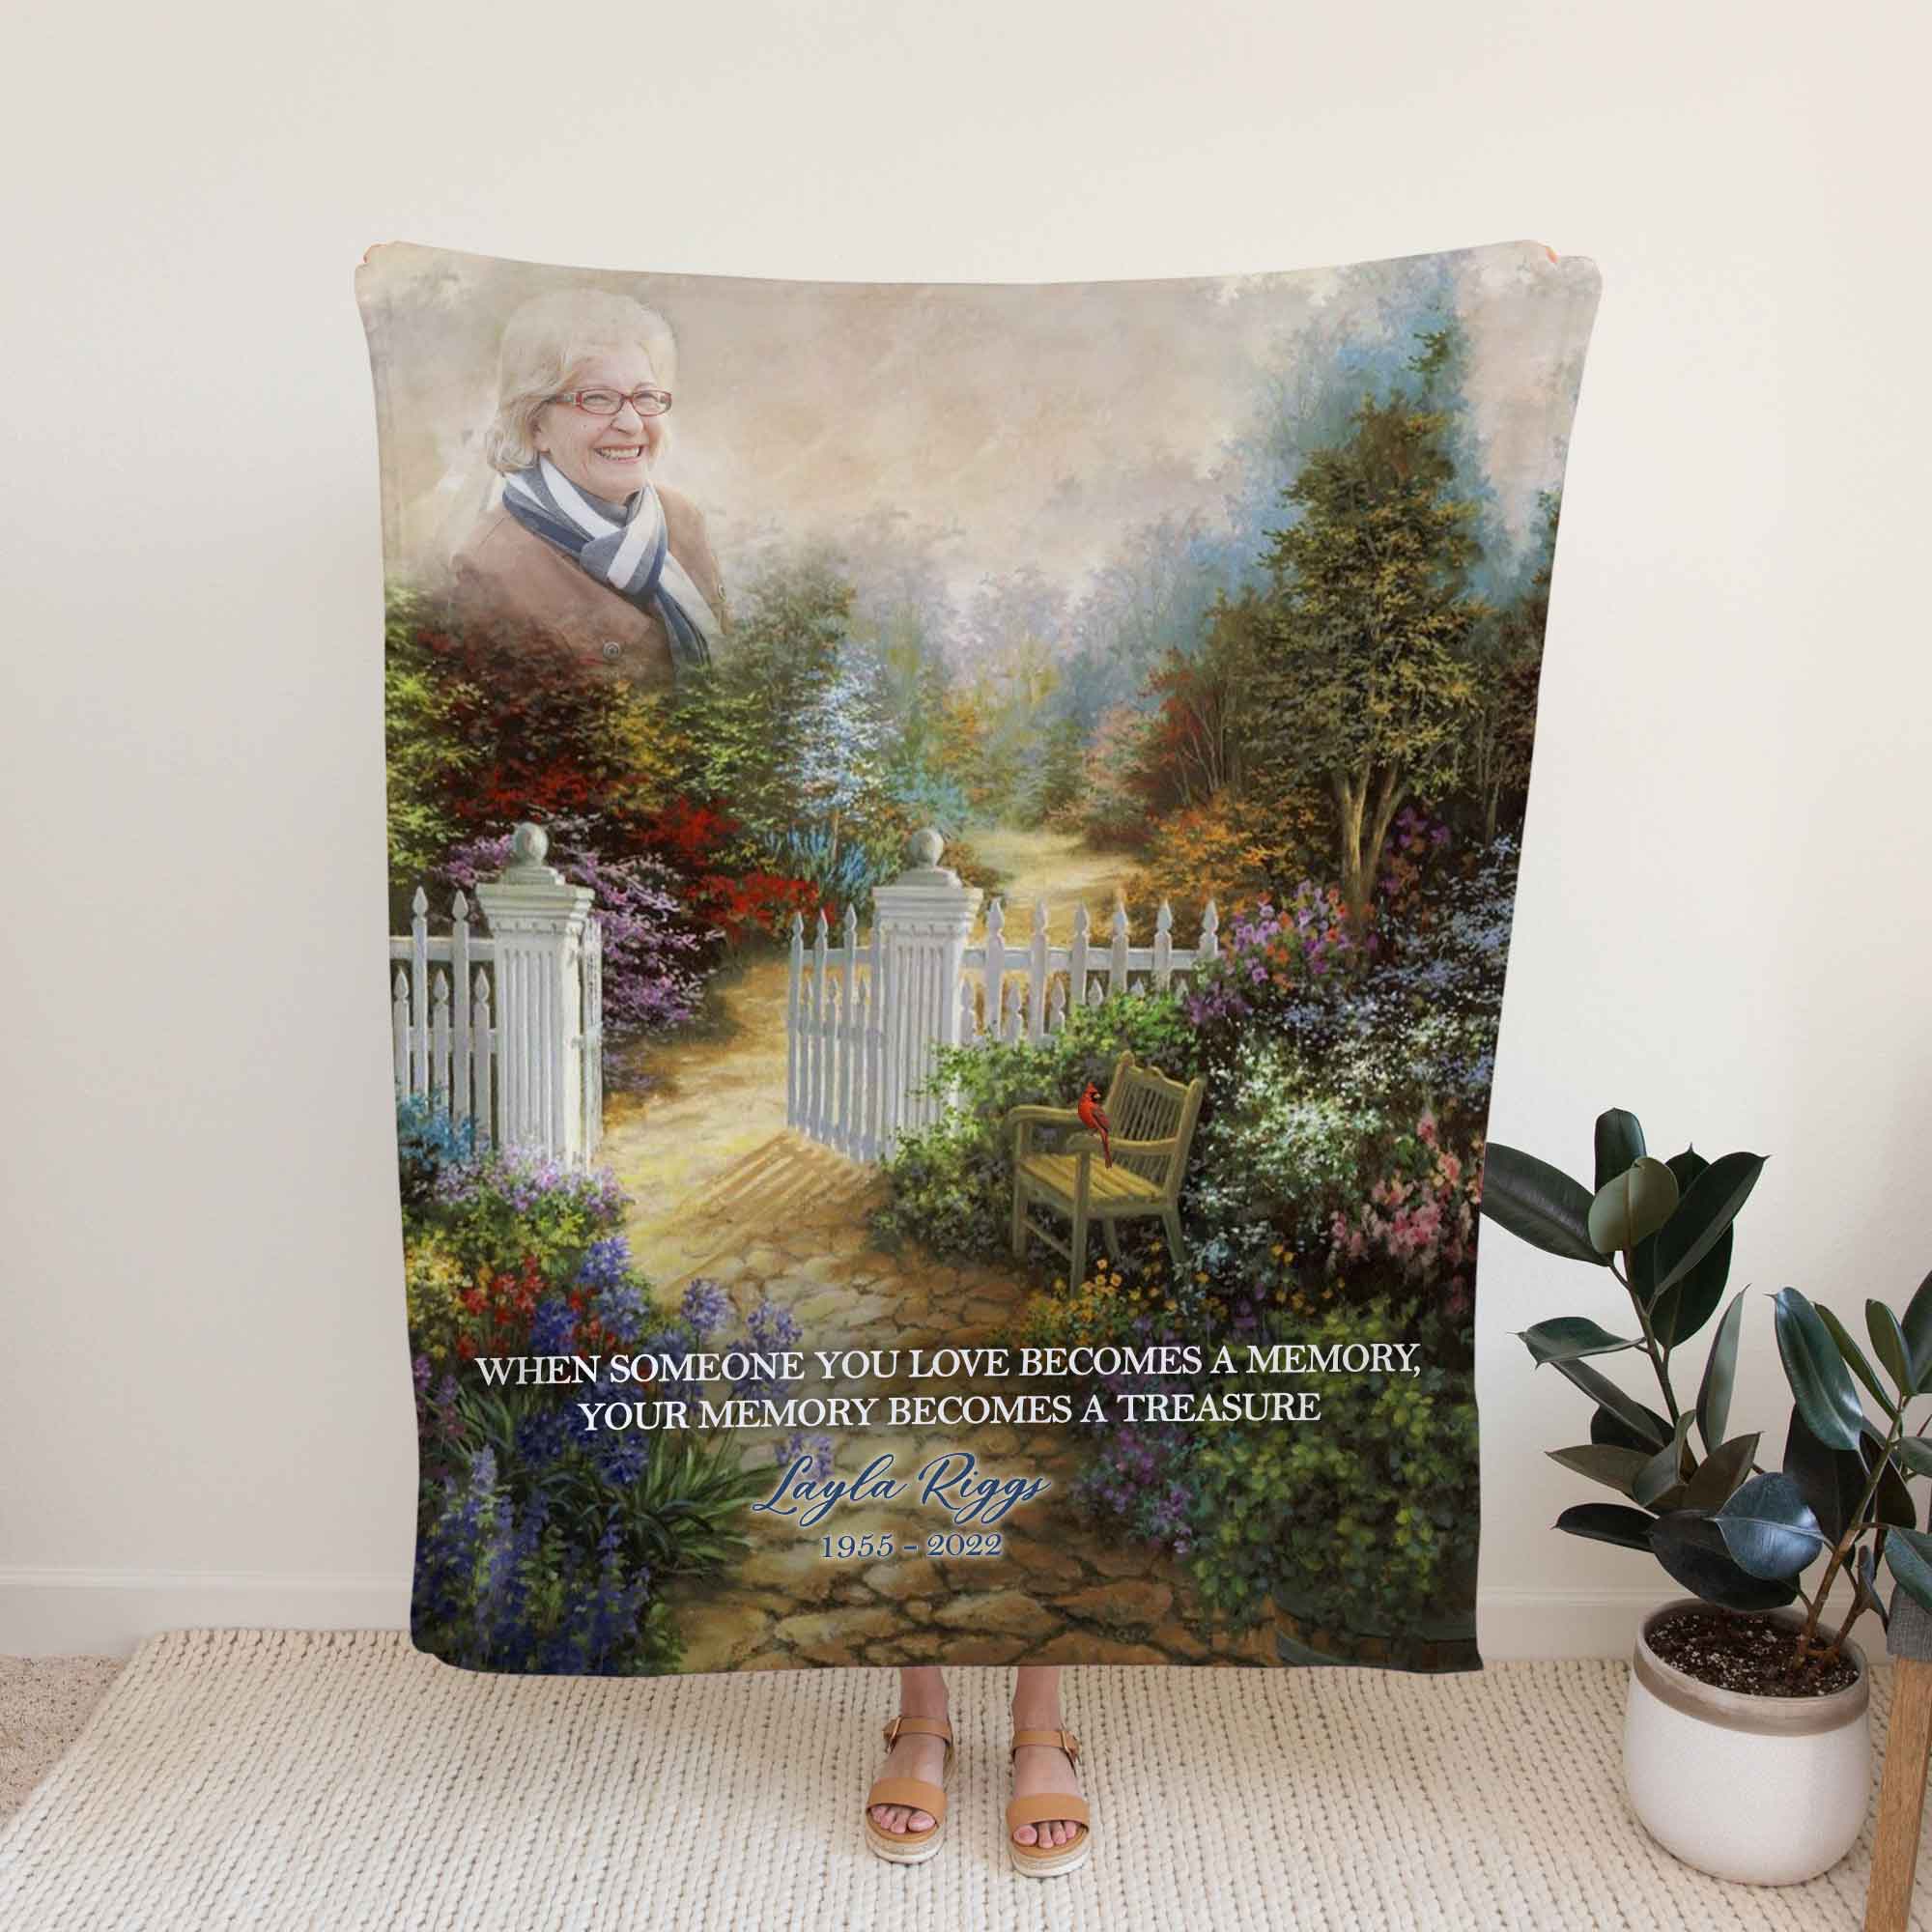 Personalized Memorial Blankets For Loss Of Mother, Condolence Blankets For Mothers Day Gift, Sympathy Blanket For Funeral